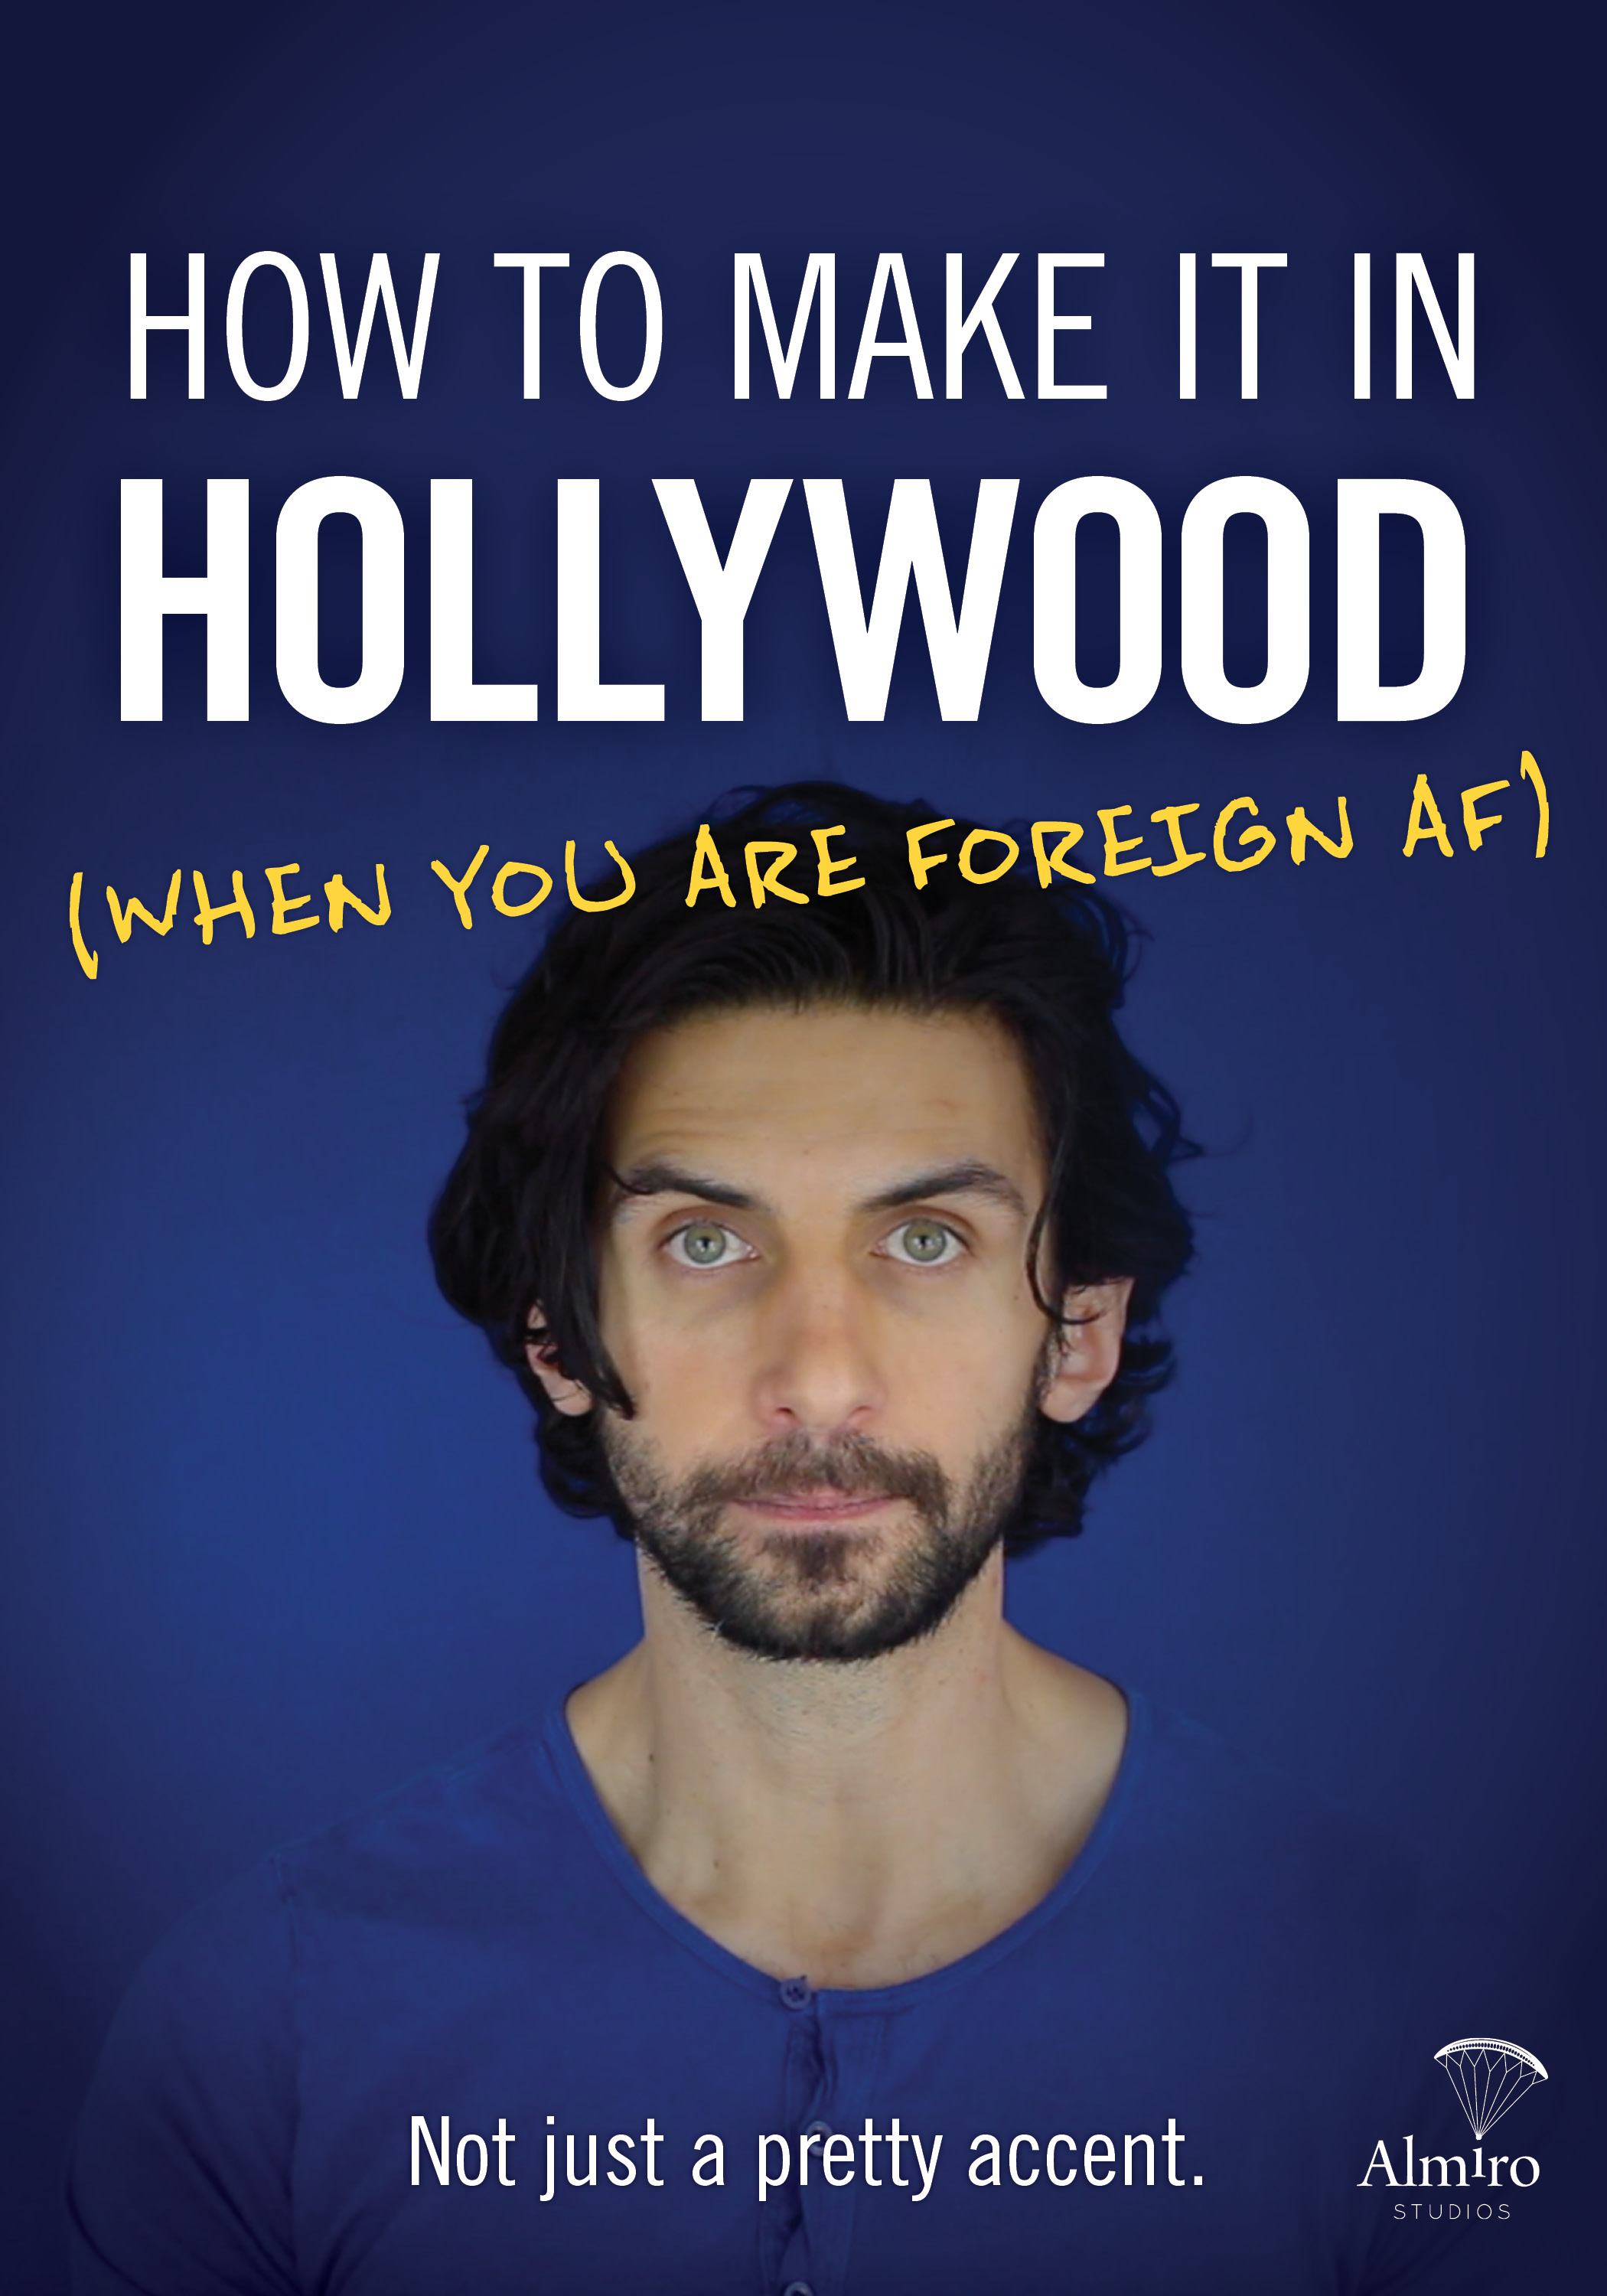 How to Make It in Hollywood (When You Are Foreign AF)